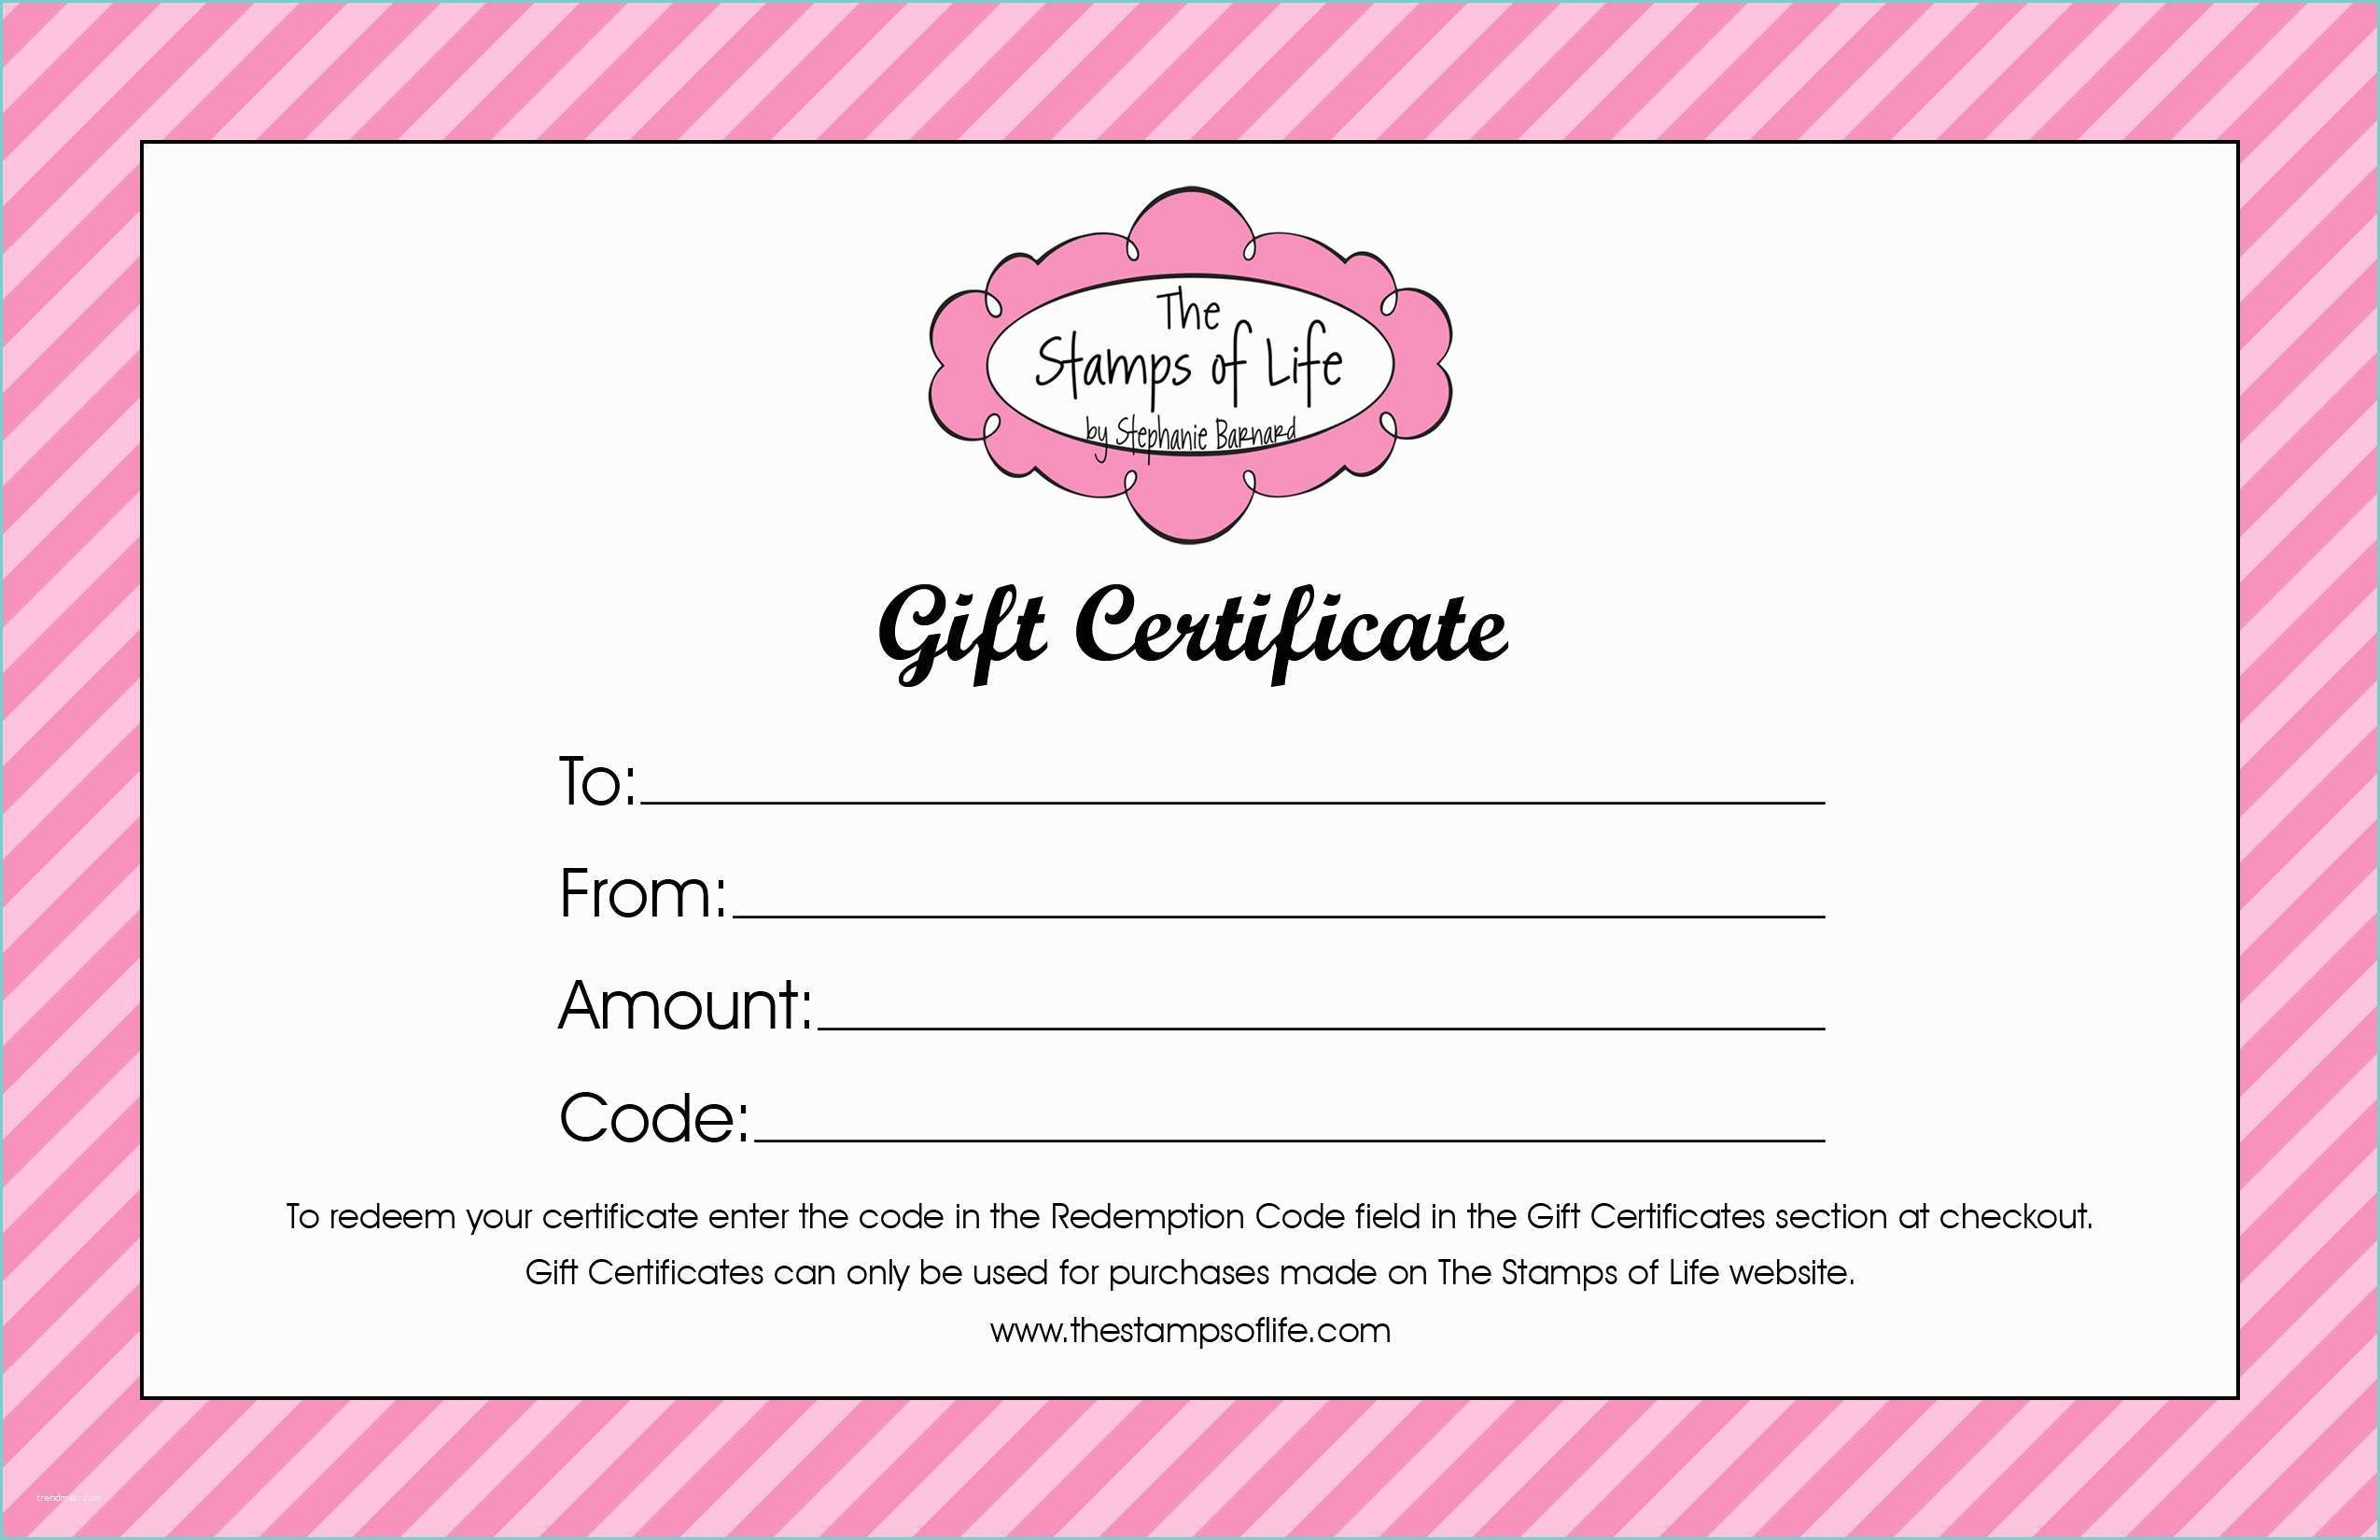 How to Write Certificate 21 Free Free Gift Certificate Templates Word Excel formats